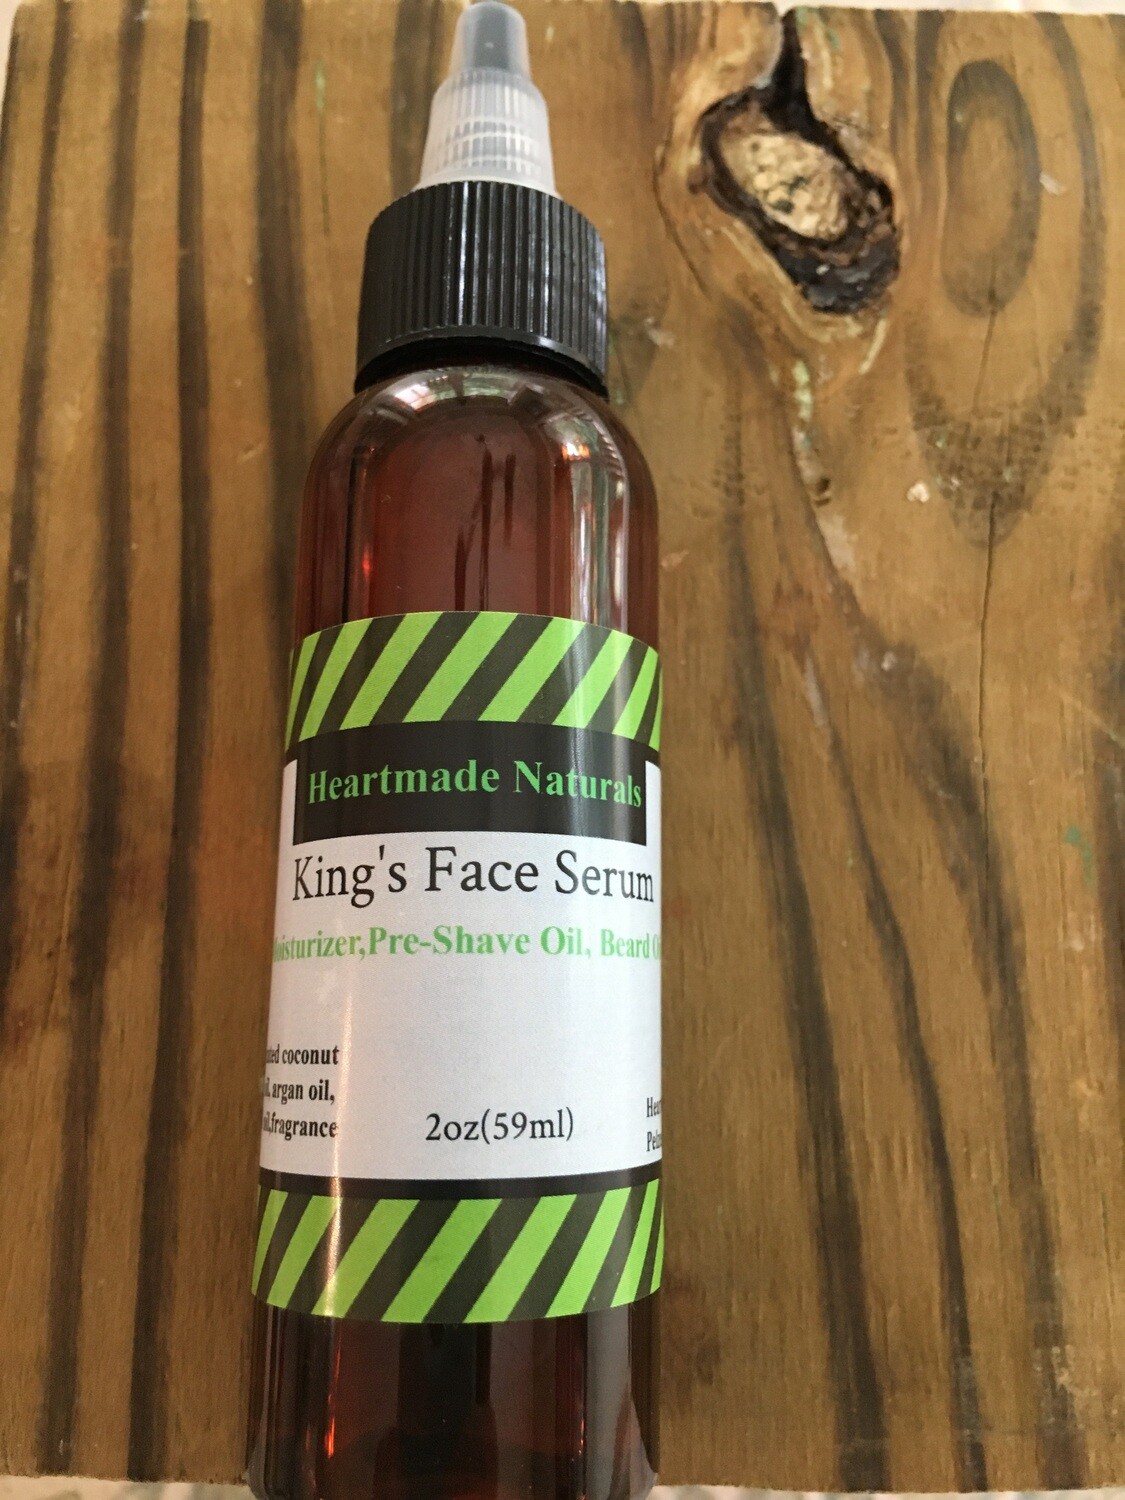 The KING’S Face Serum